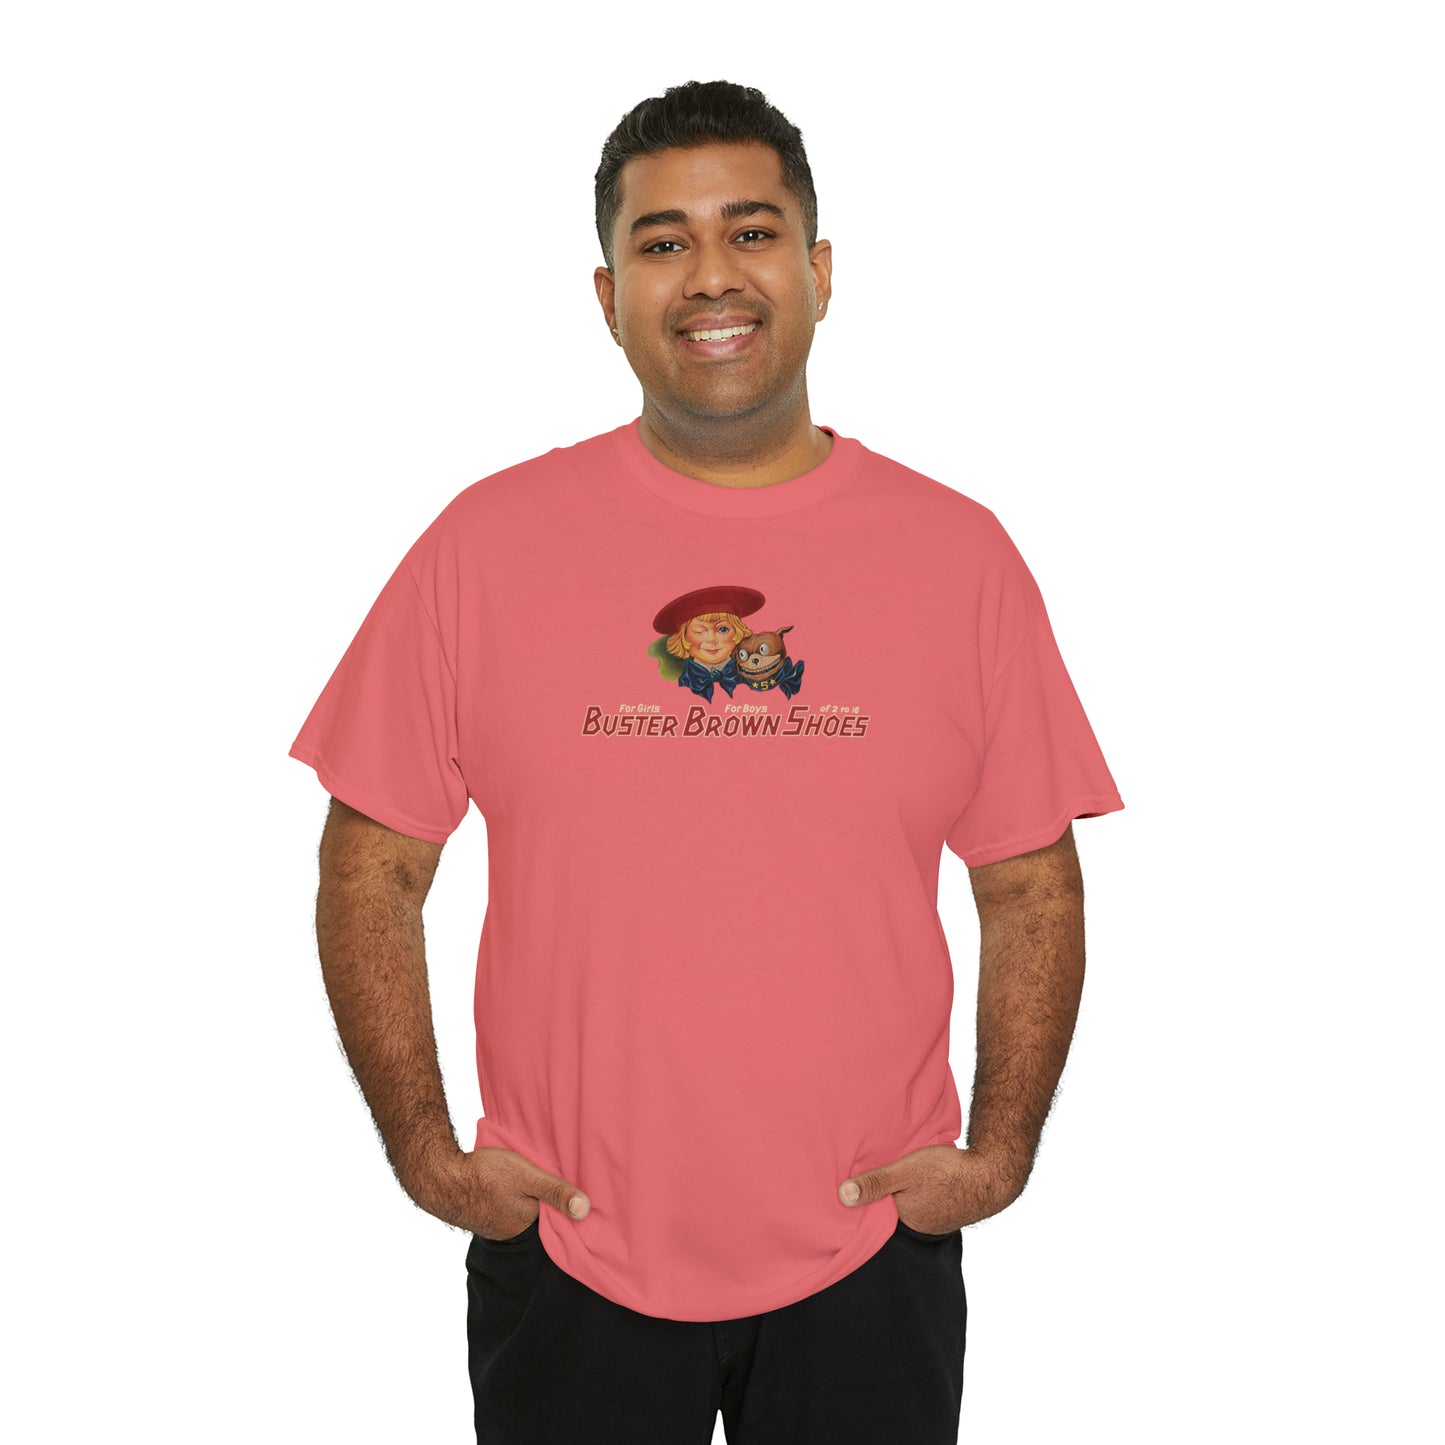 Buster Brown Shoes T-Shirt